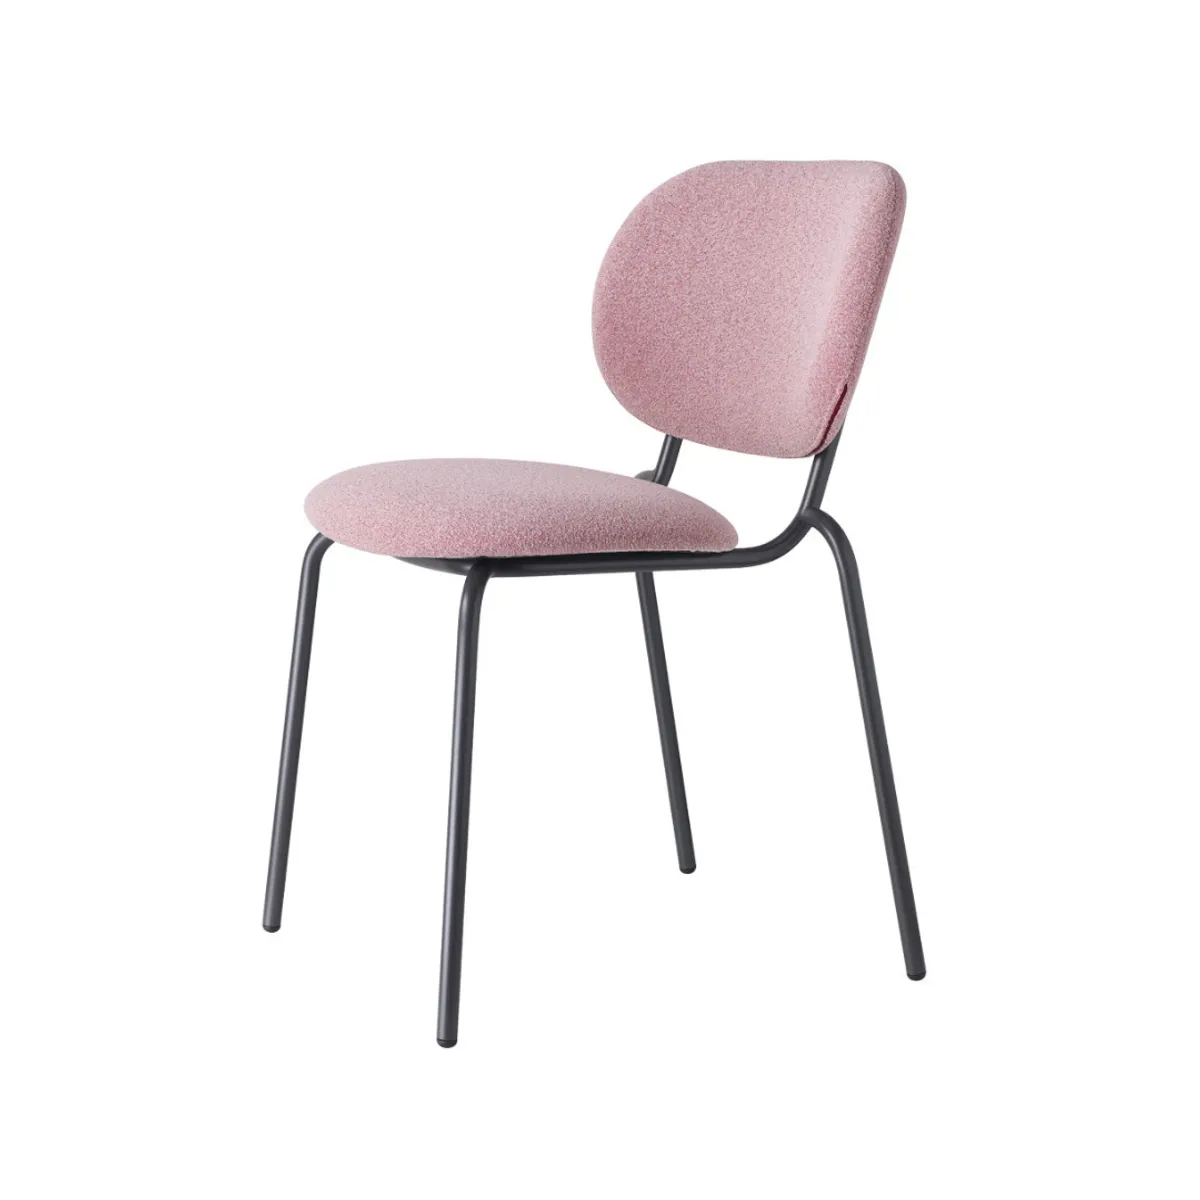 Layla soft side chair 4